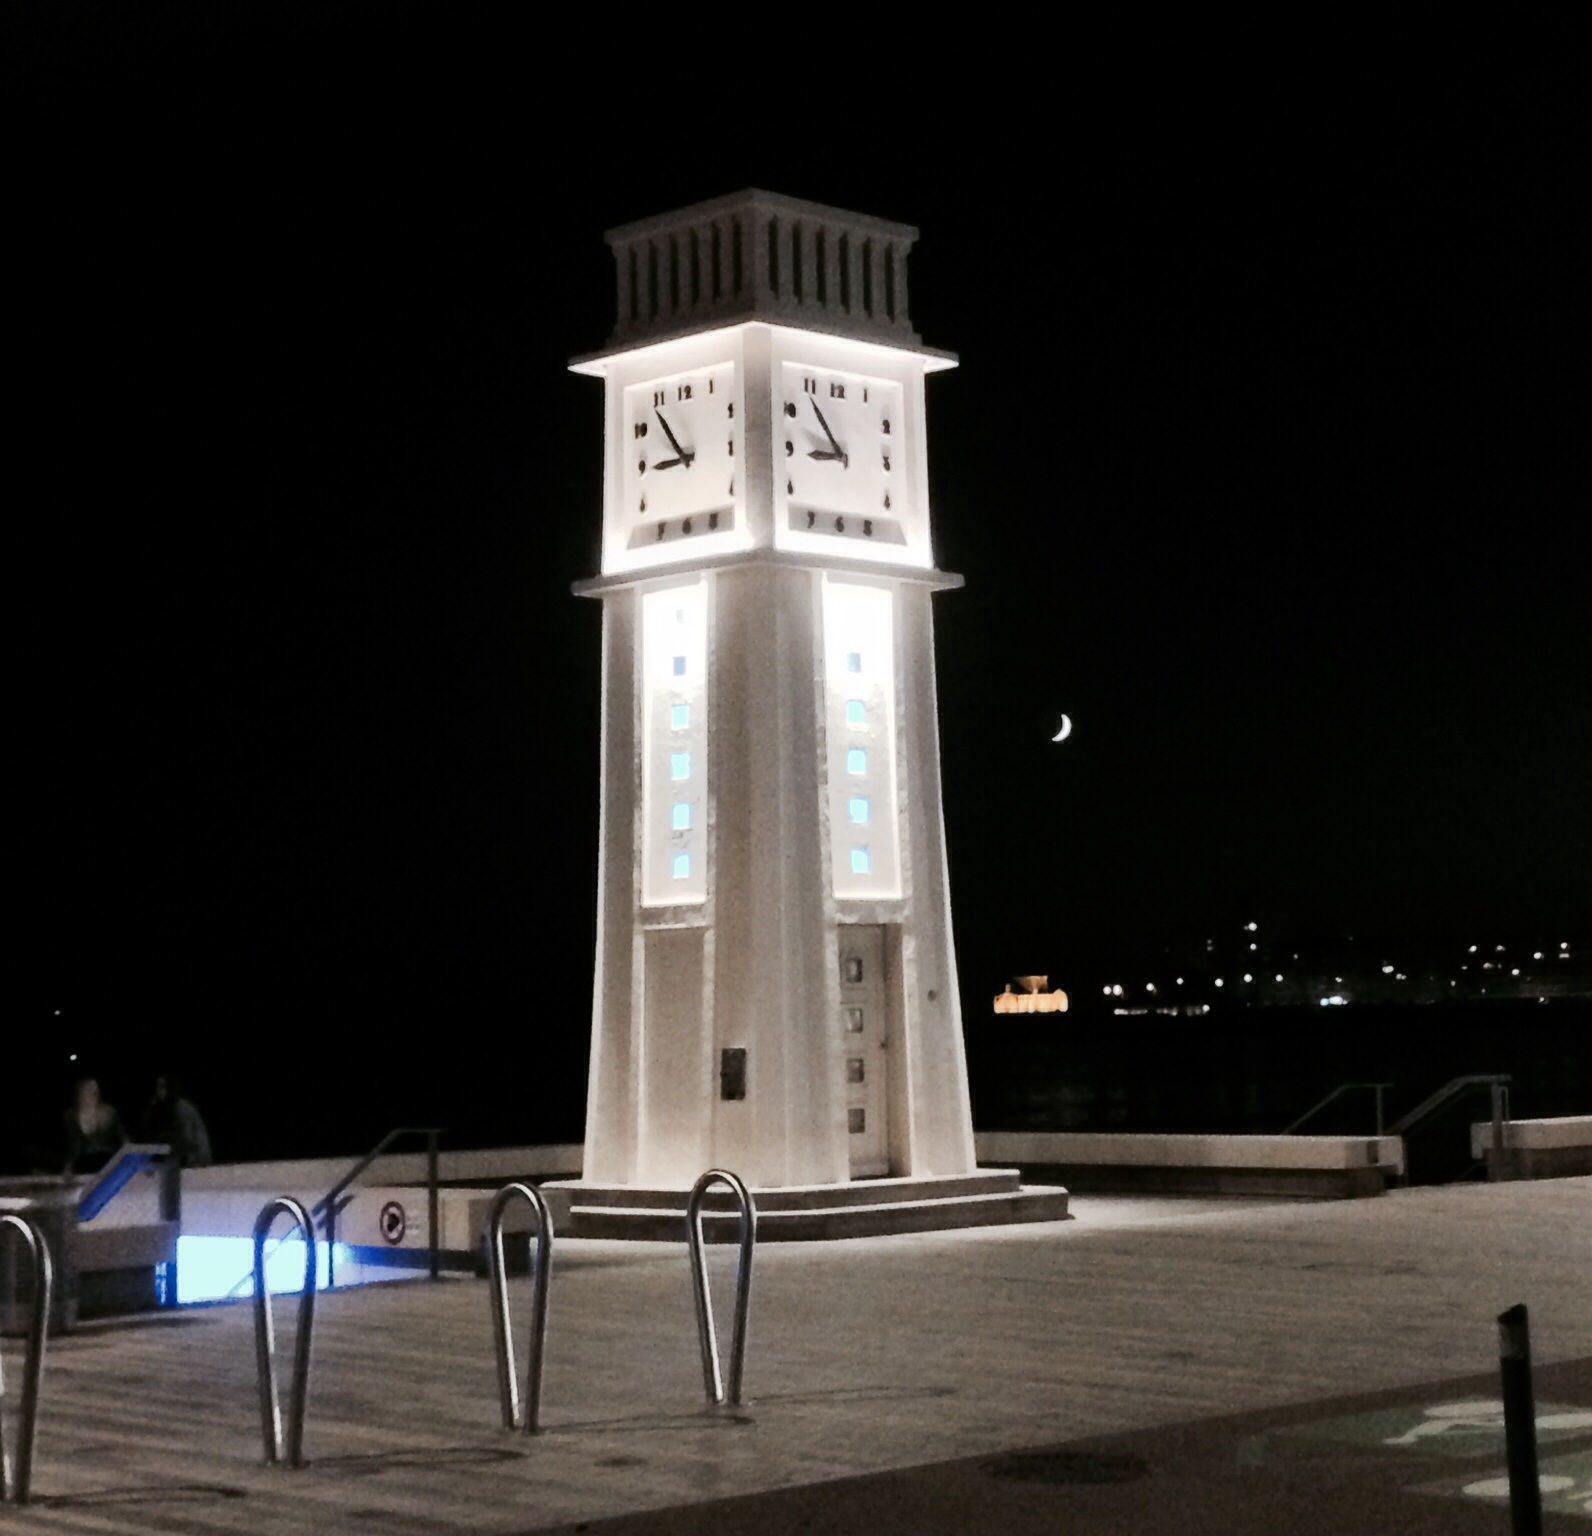 Beach clock with sliver moon 